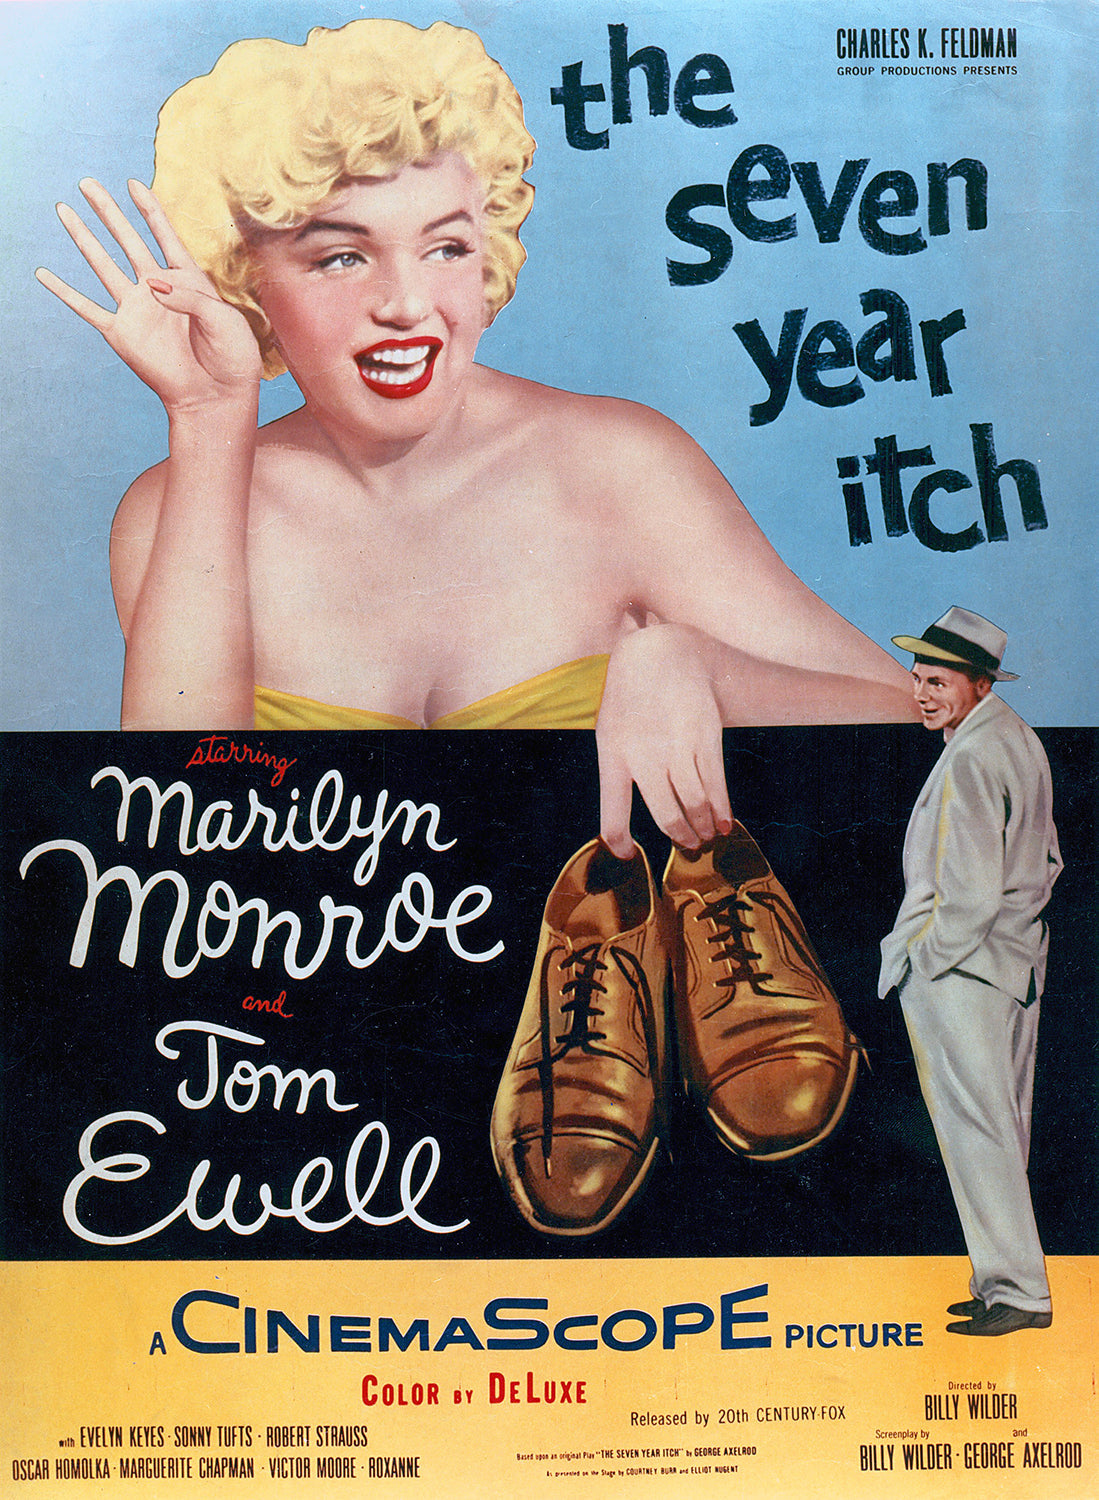 The Seven Year Itch Marilyn Monroe Vintage Movie Poster